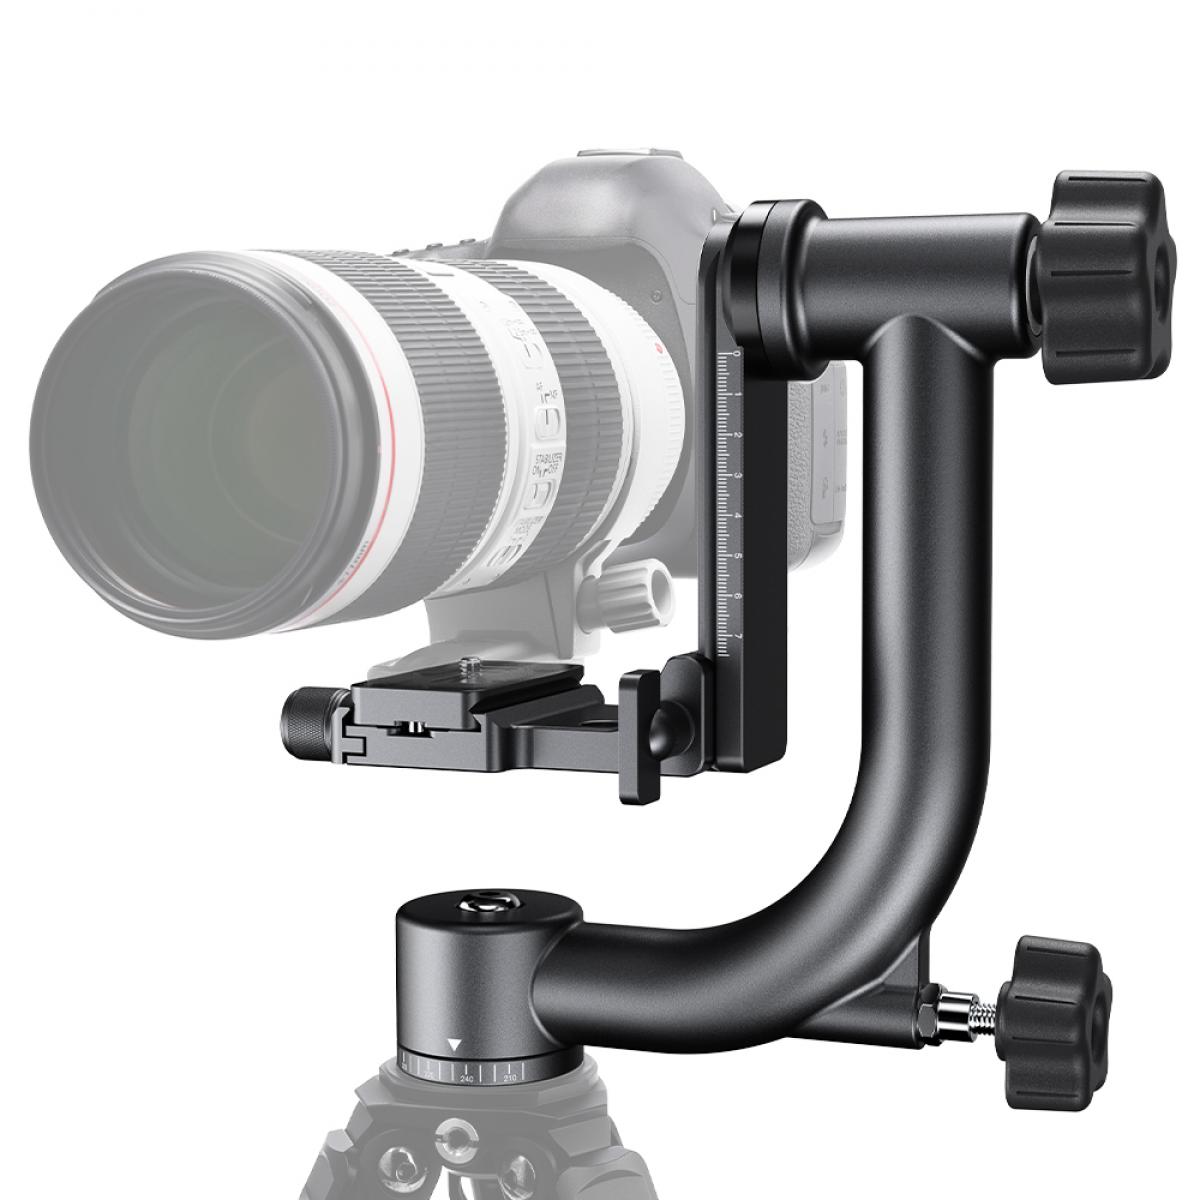 HIFFIN 360 Degree Gimble Tripod Head Panoramic Gimbal Tripod Head with Arca-Swiss Standard 1/4'' Quick Release Plate and Bubble Level for Digital 